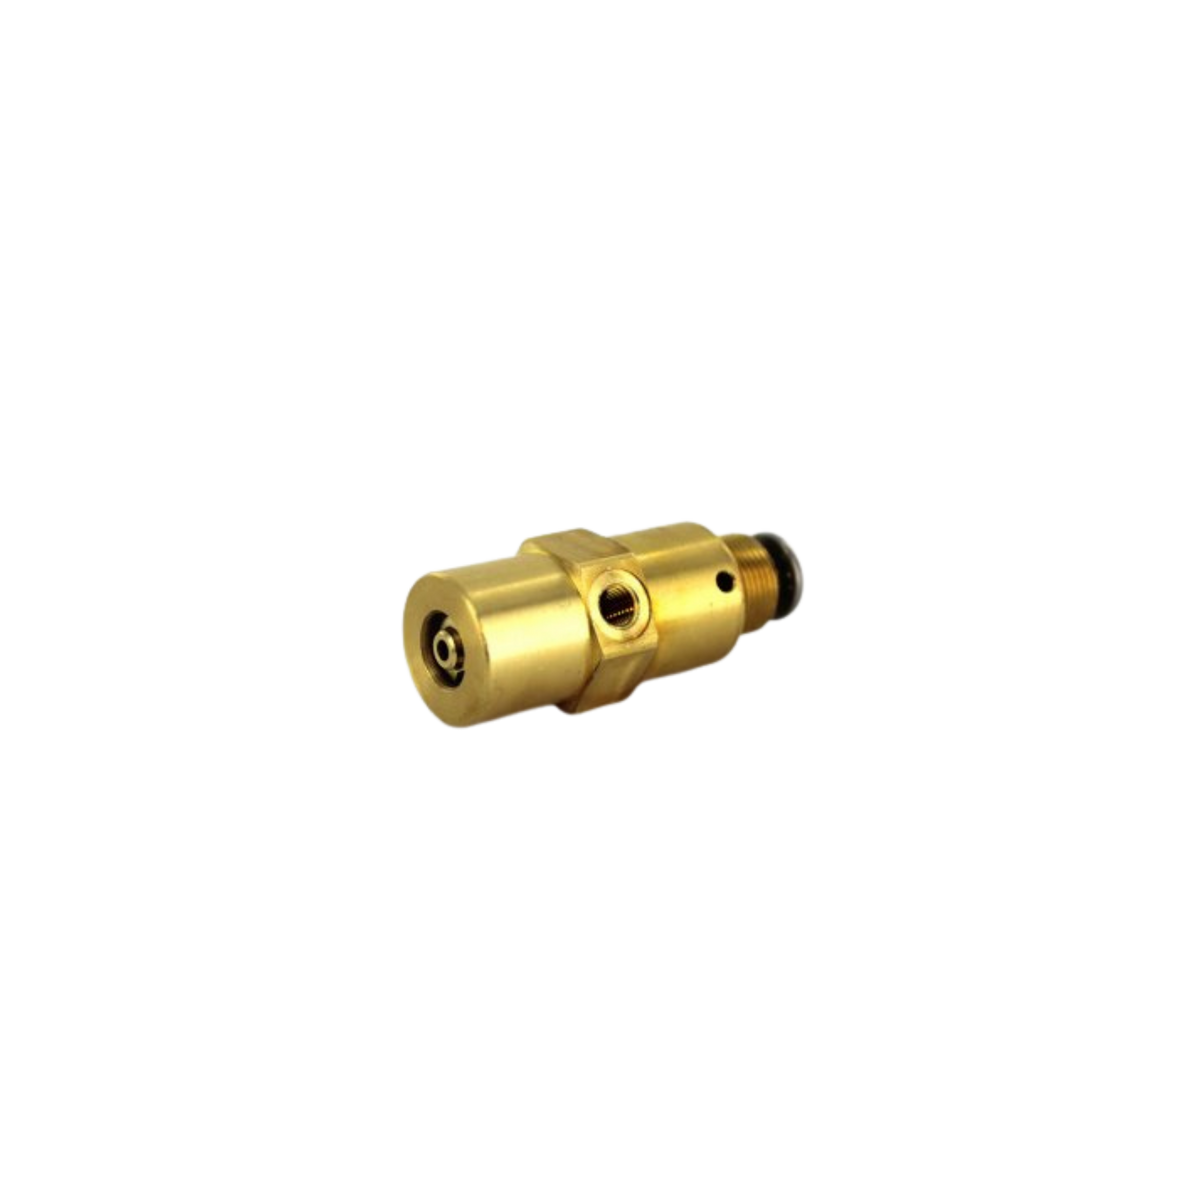 horizontal placed cylindrical shaped brass valve with a port in the center and a push button on the right